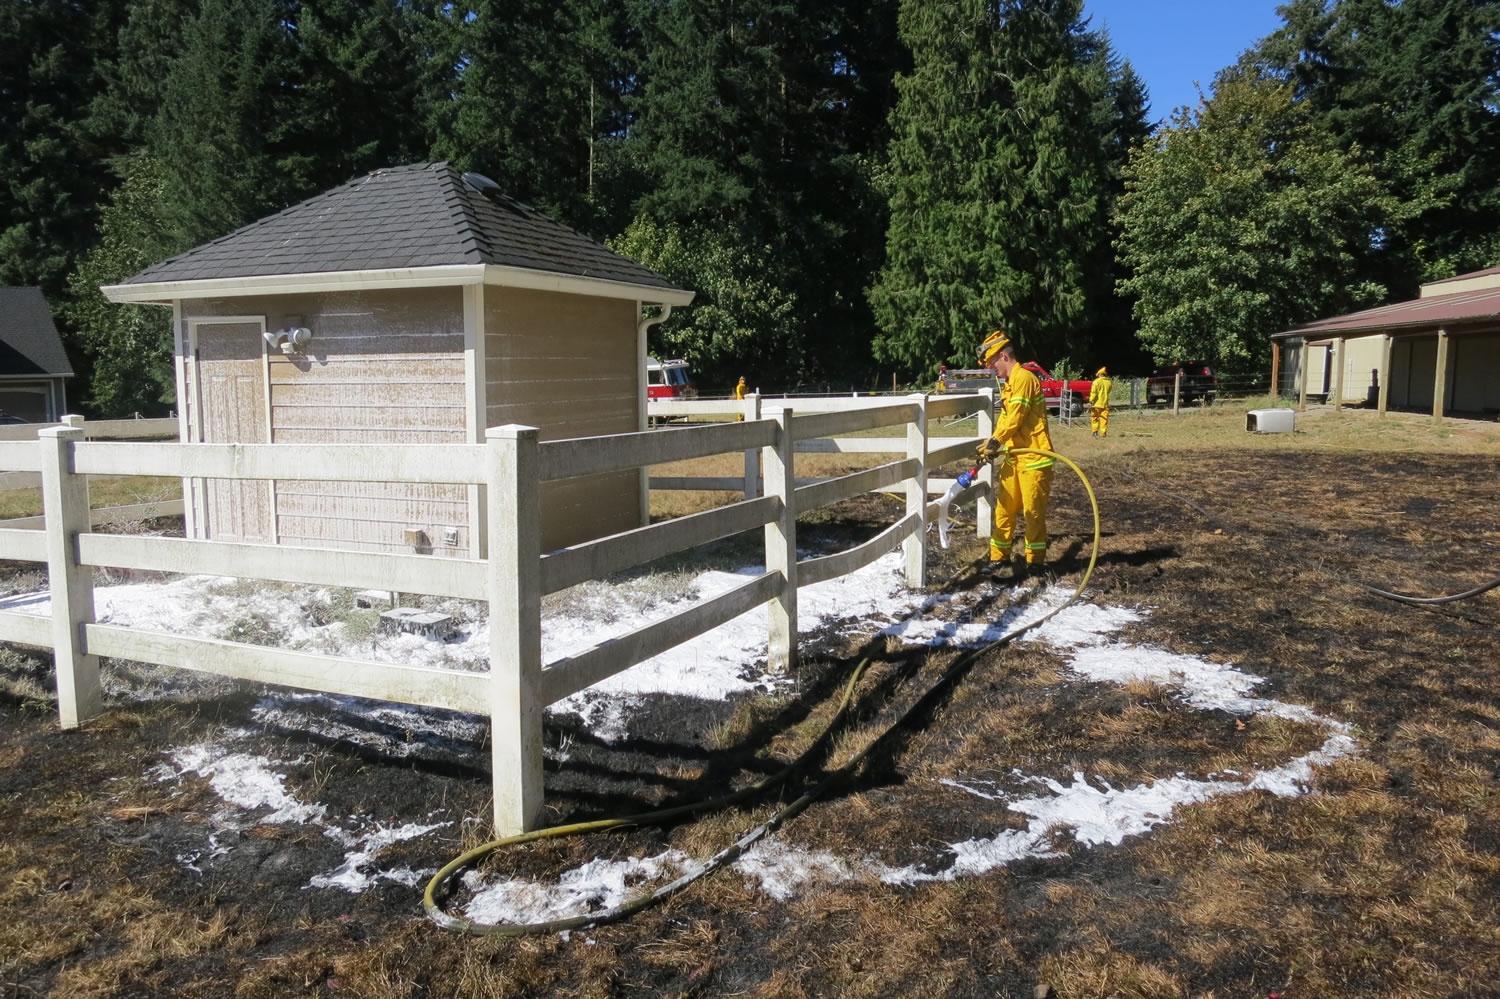 Clark County Fire District 3 quickly put out a grass fire Thursday morning in the area of 127th Circle and 192nd Ave. They reminded residents that a burn ban is in effect through Oct.